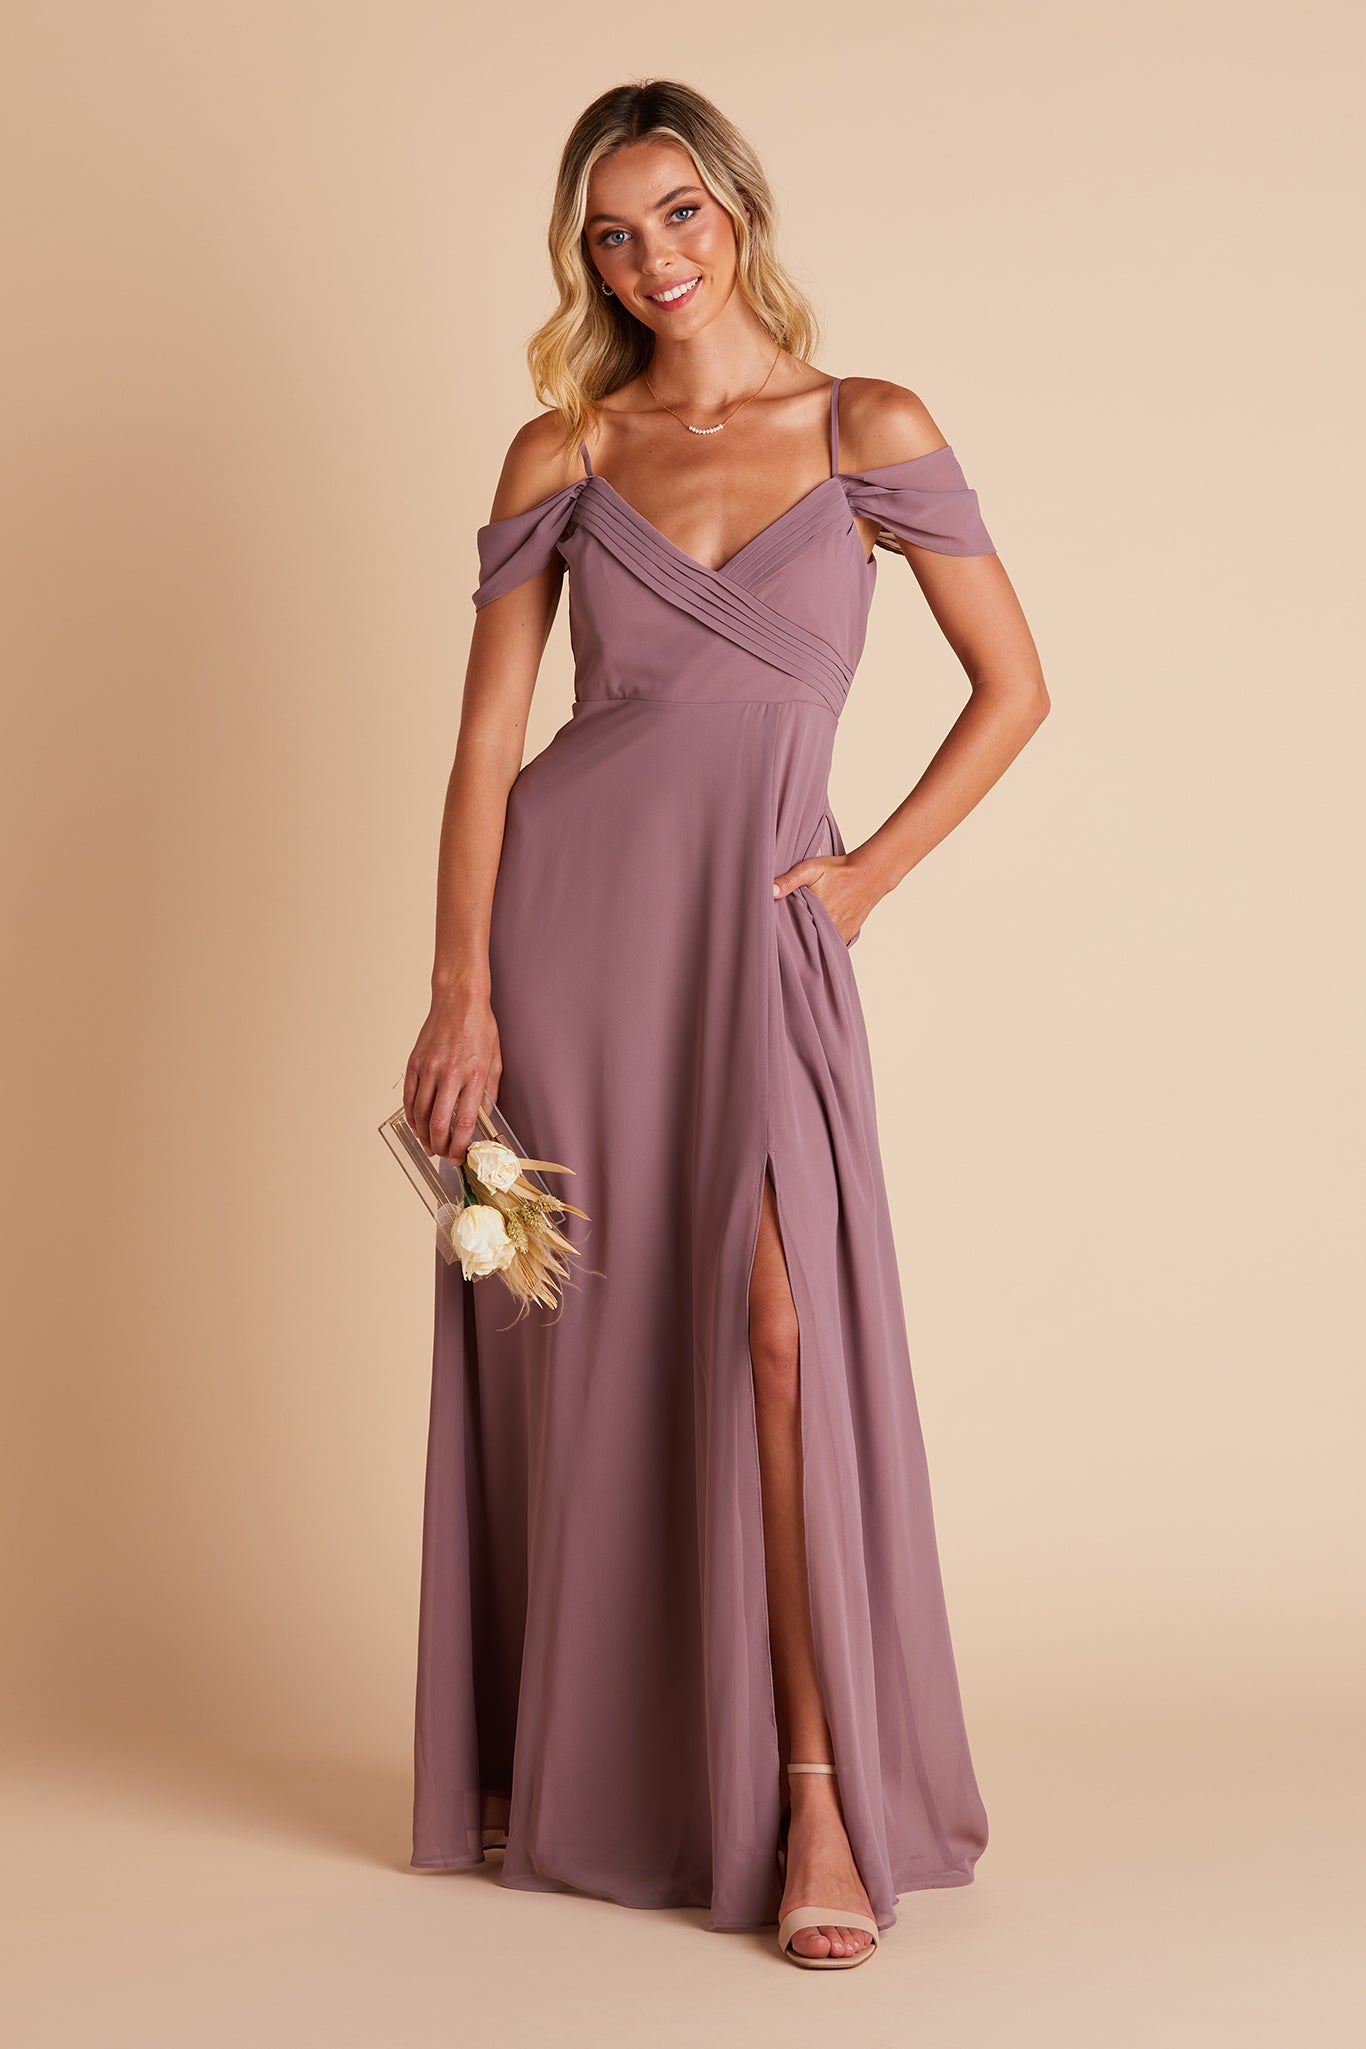 Spence convertible bridesmaid dress in dark mauve chiffon by Birdy Grey, front view